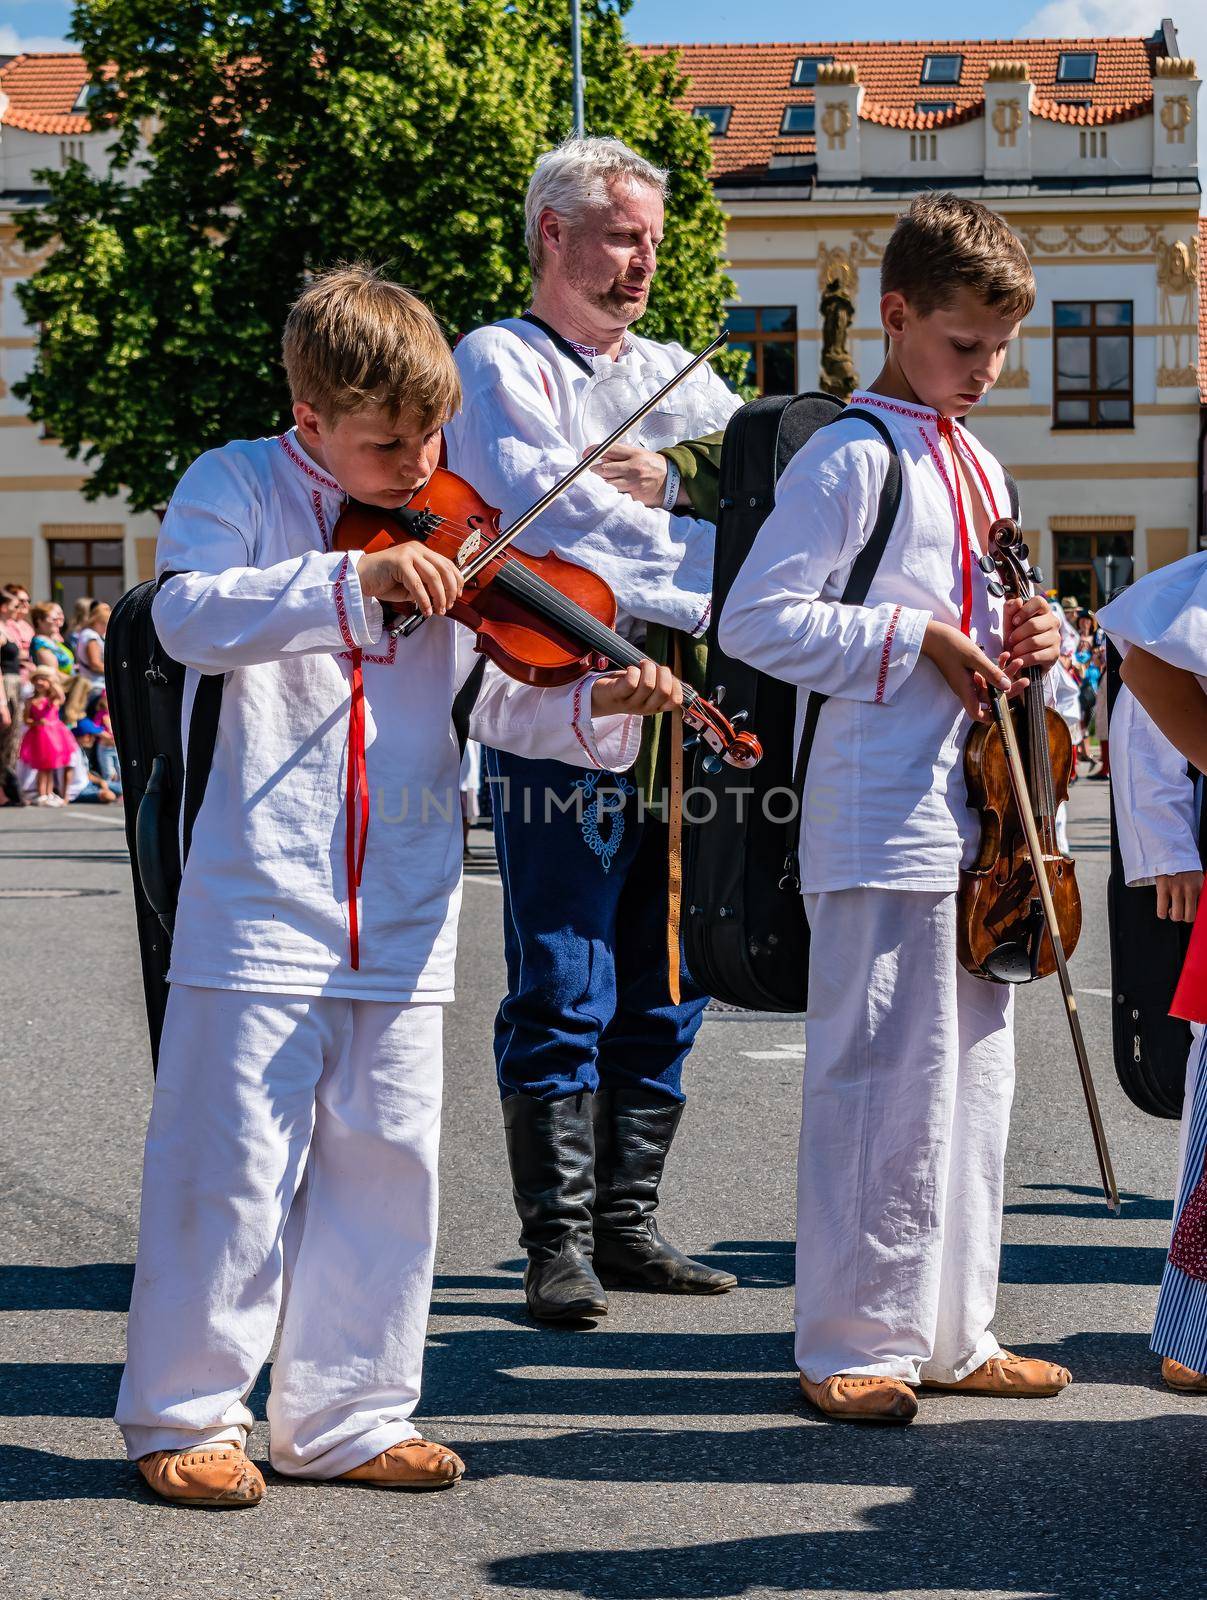 Children in folk costumes play the violin by rostik924